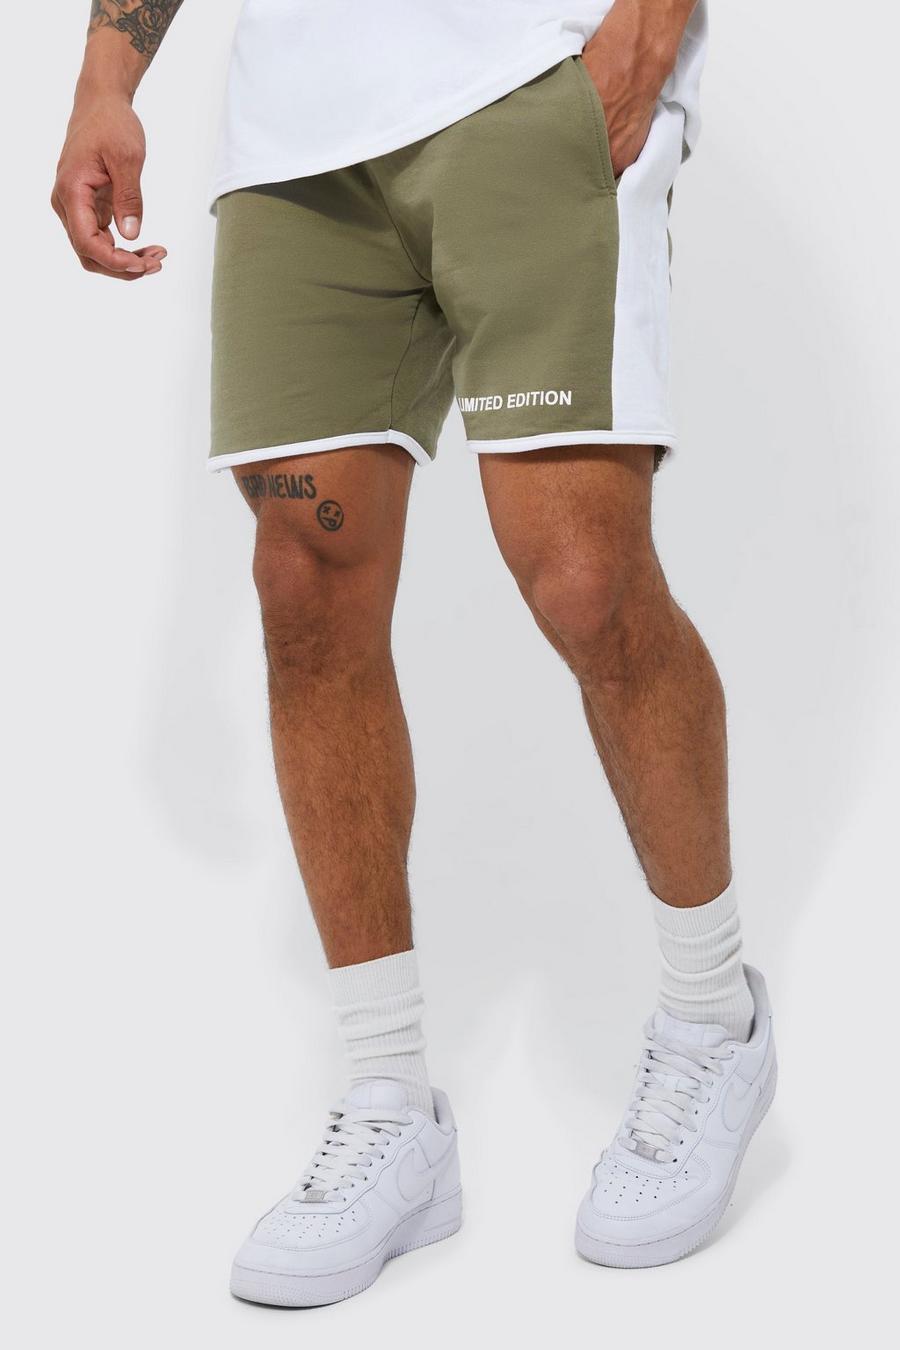 Olive green Limited Relaxed Short Length Side Panel Short 